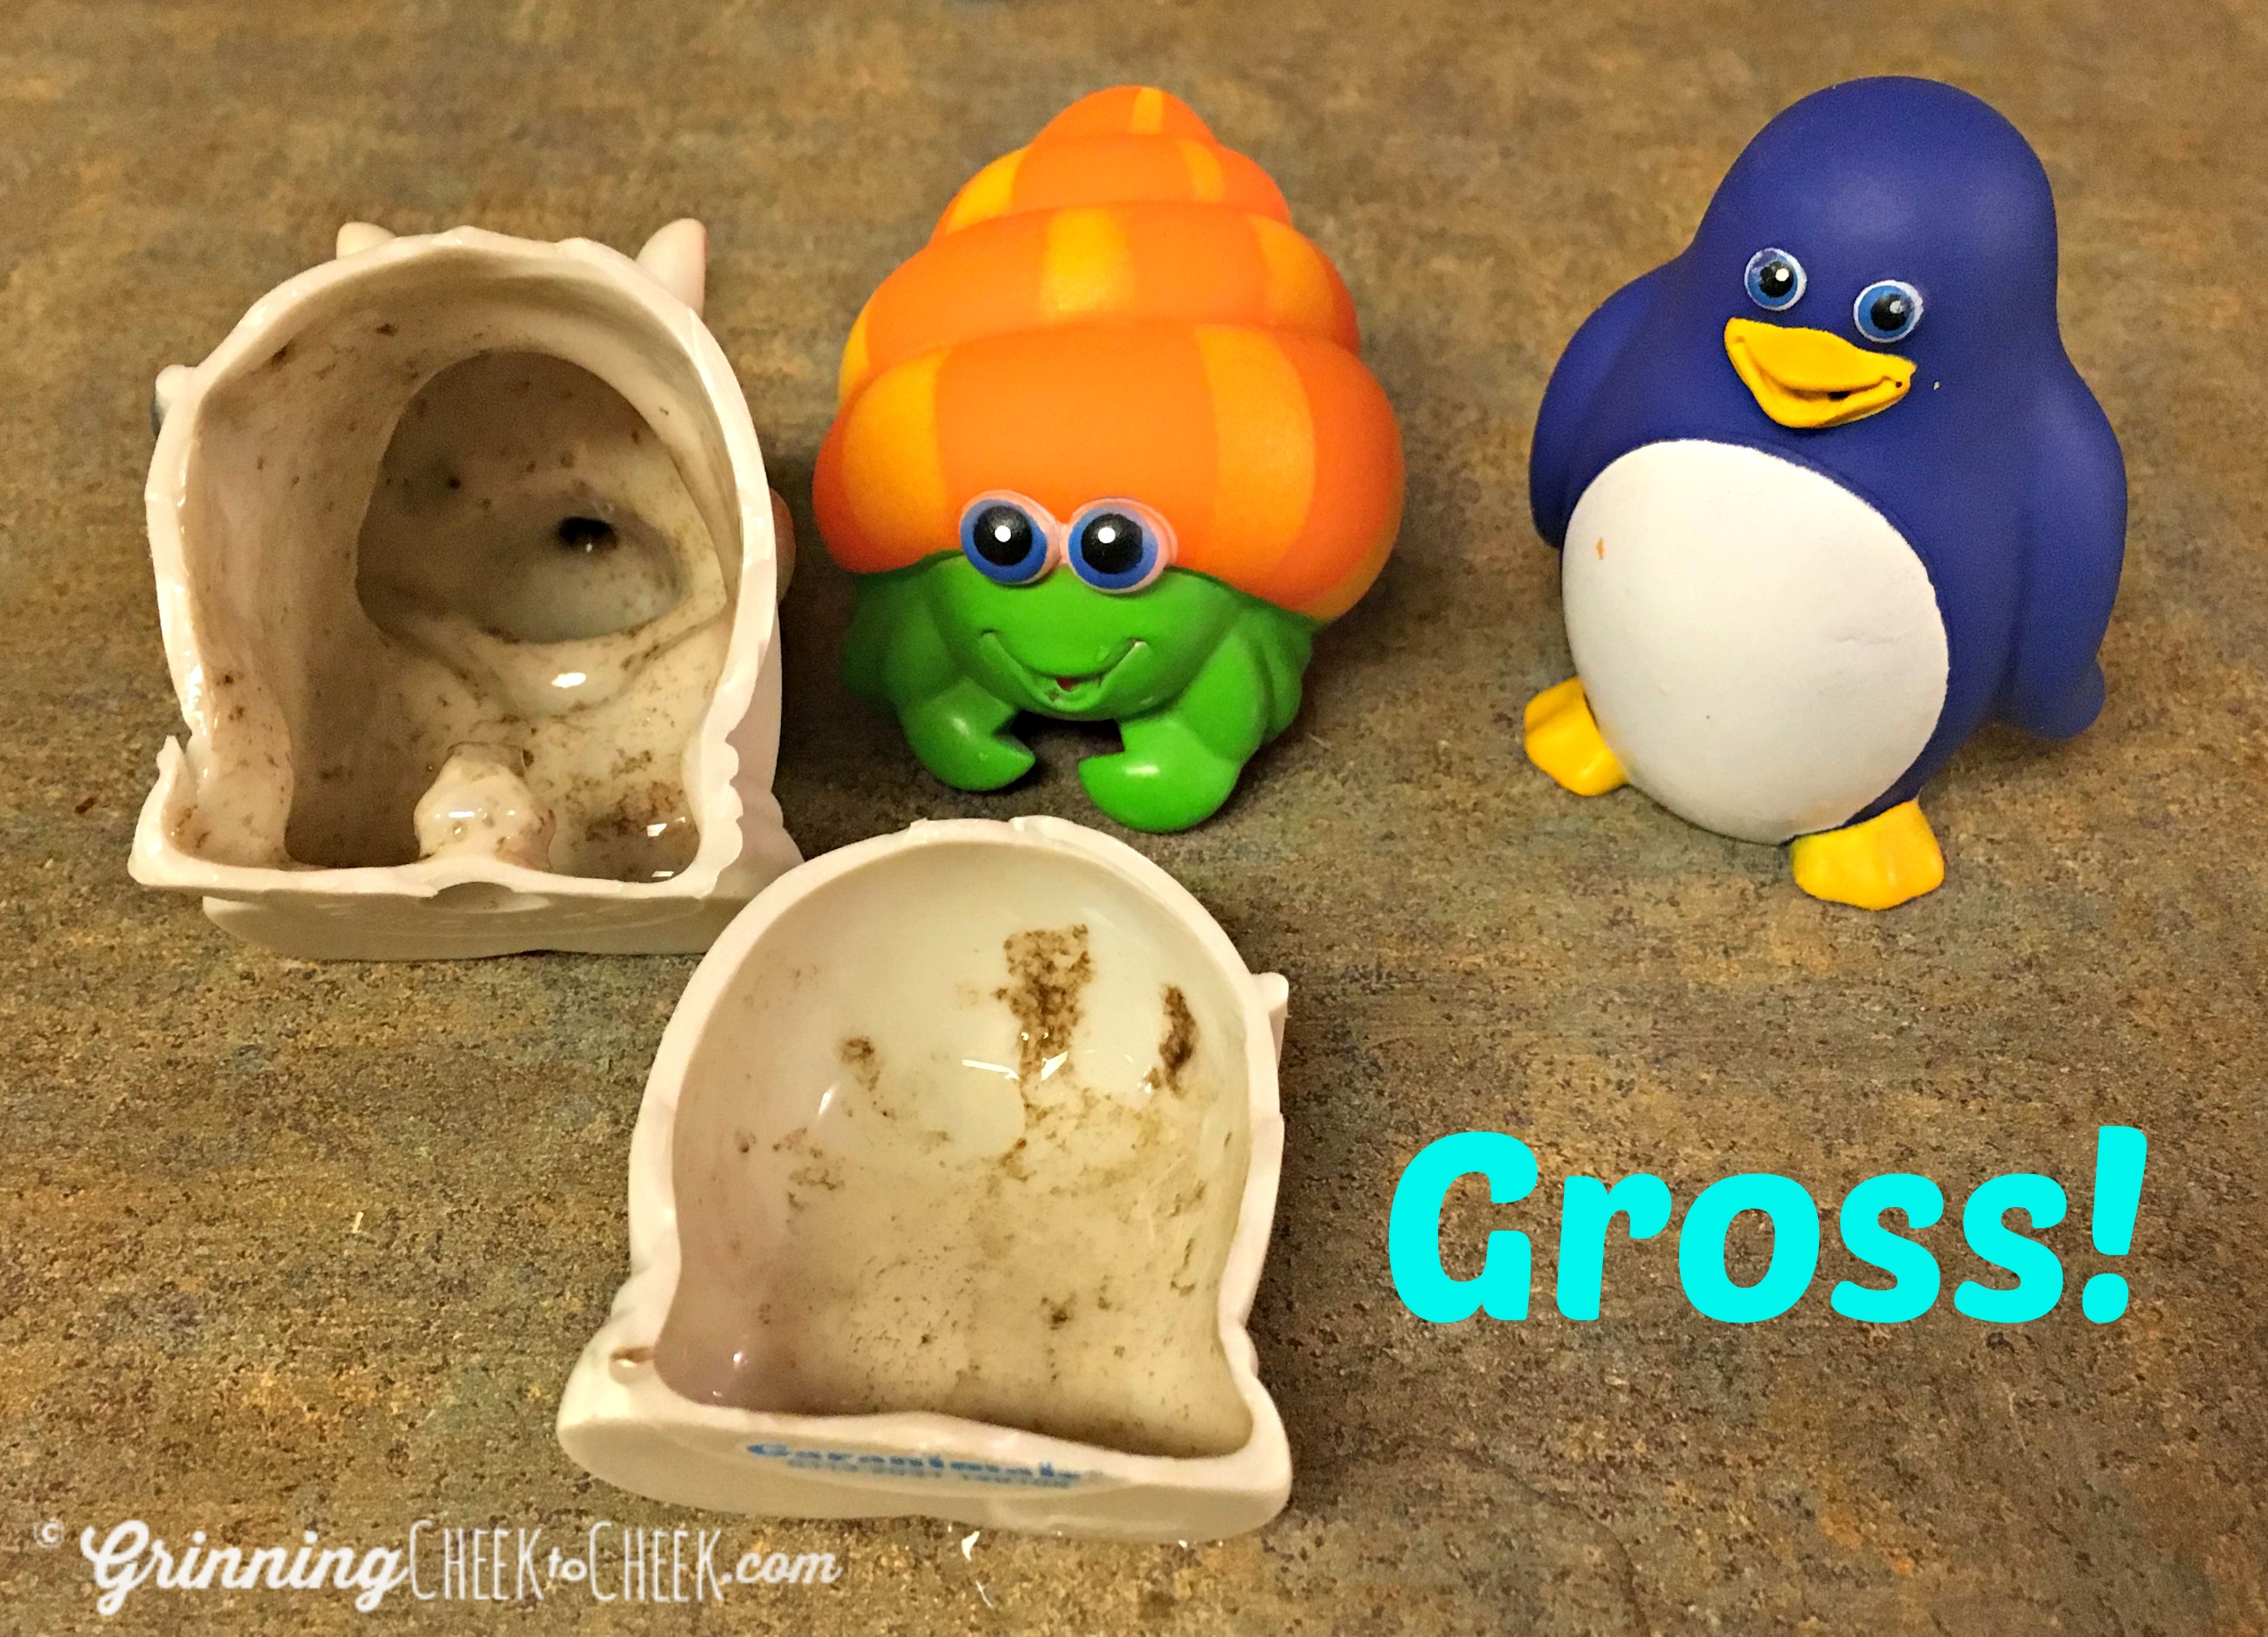 Cleaning Bath Tub Squirt Toys #Giveaway - Grinning Cheek To cheek